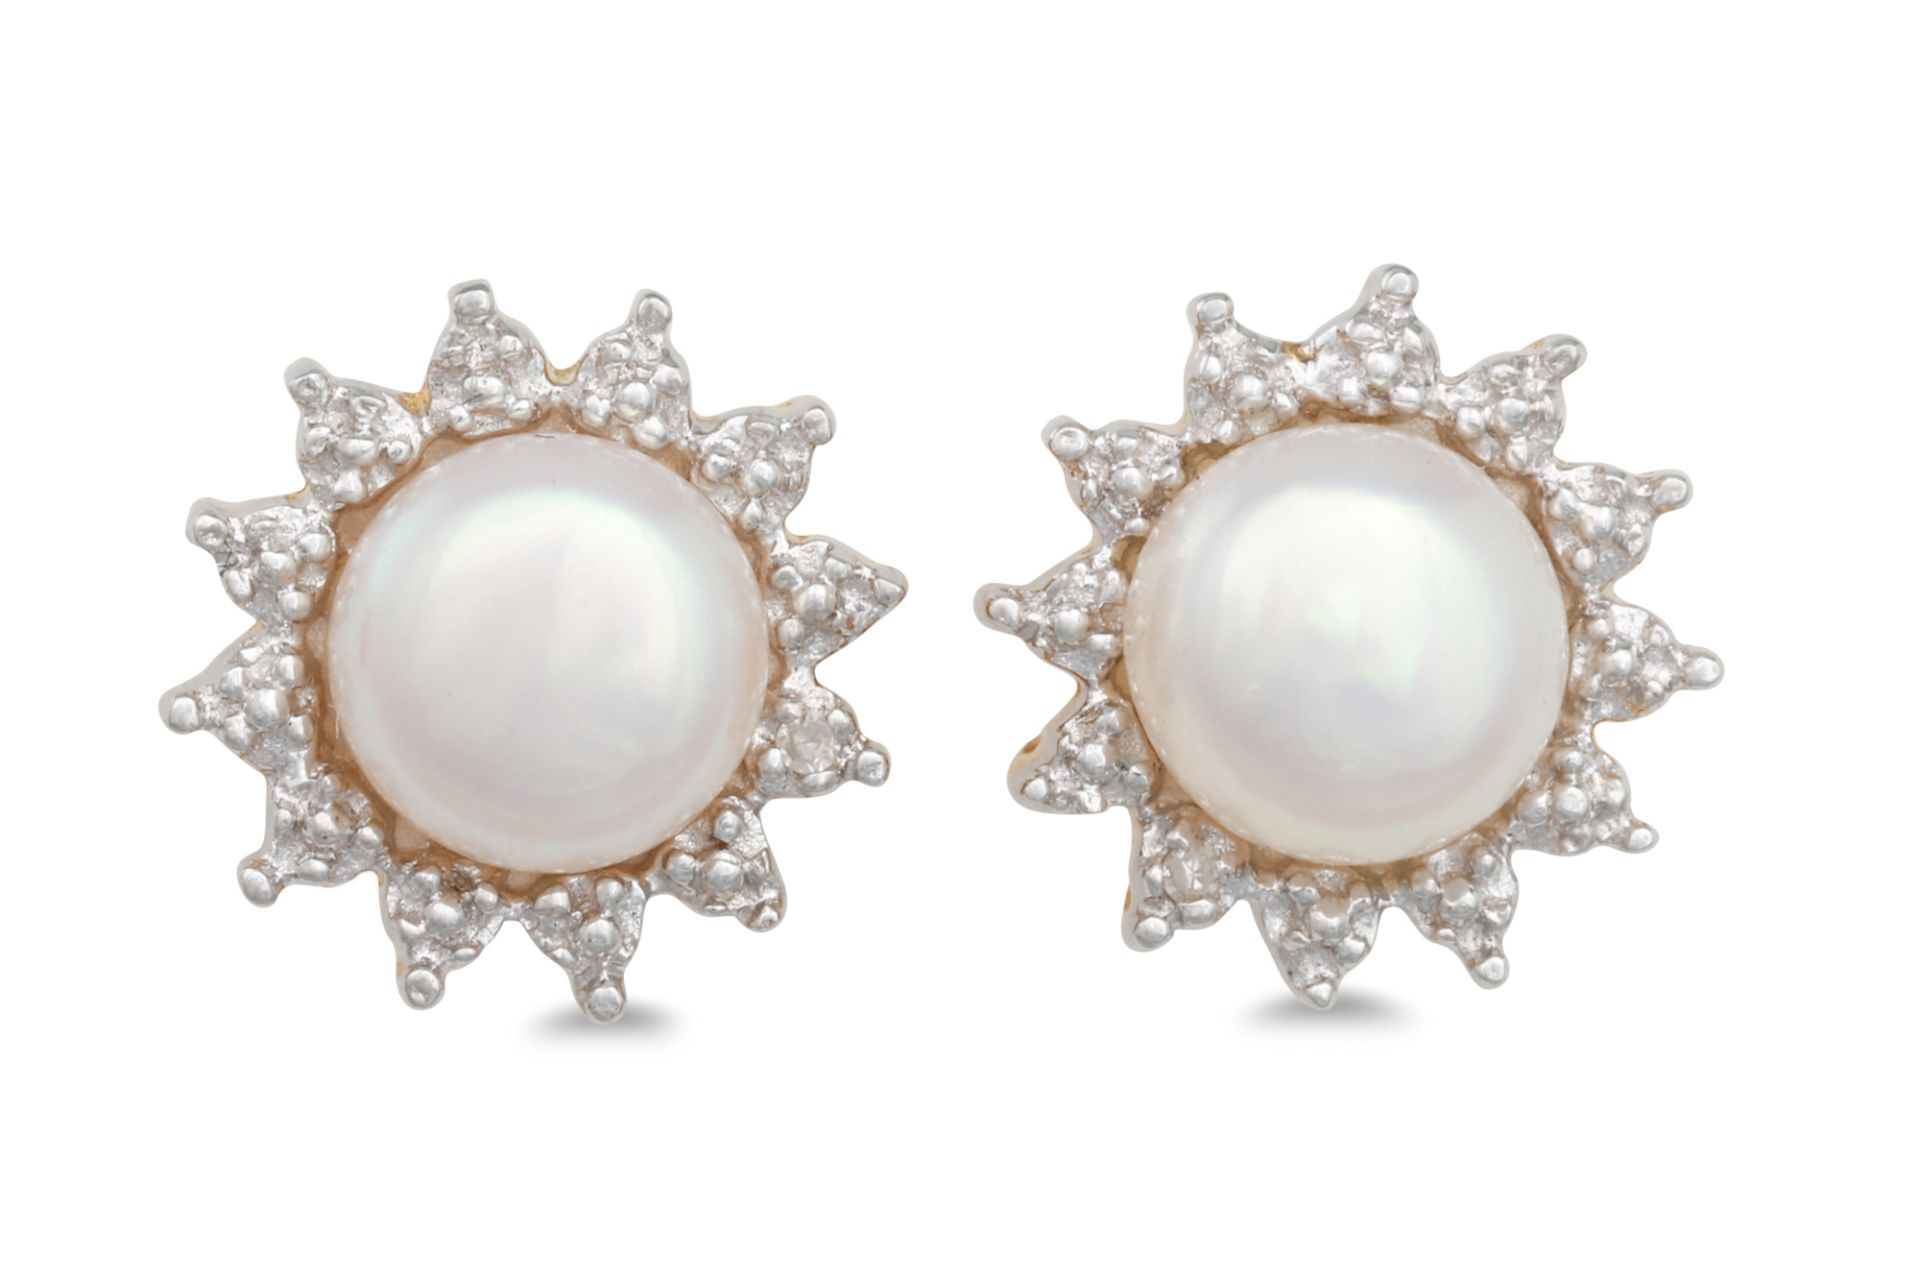 A PAIR OF DIAMOND AND PEARL CLUSTER EARRINGS, the white tone pearl to a diamond surround, mounted in